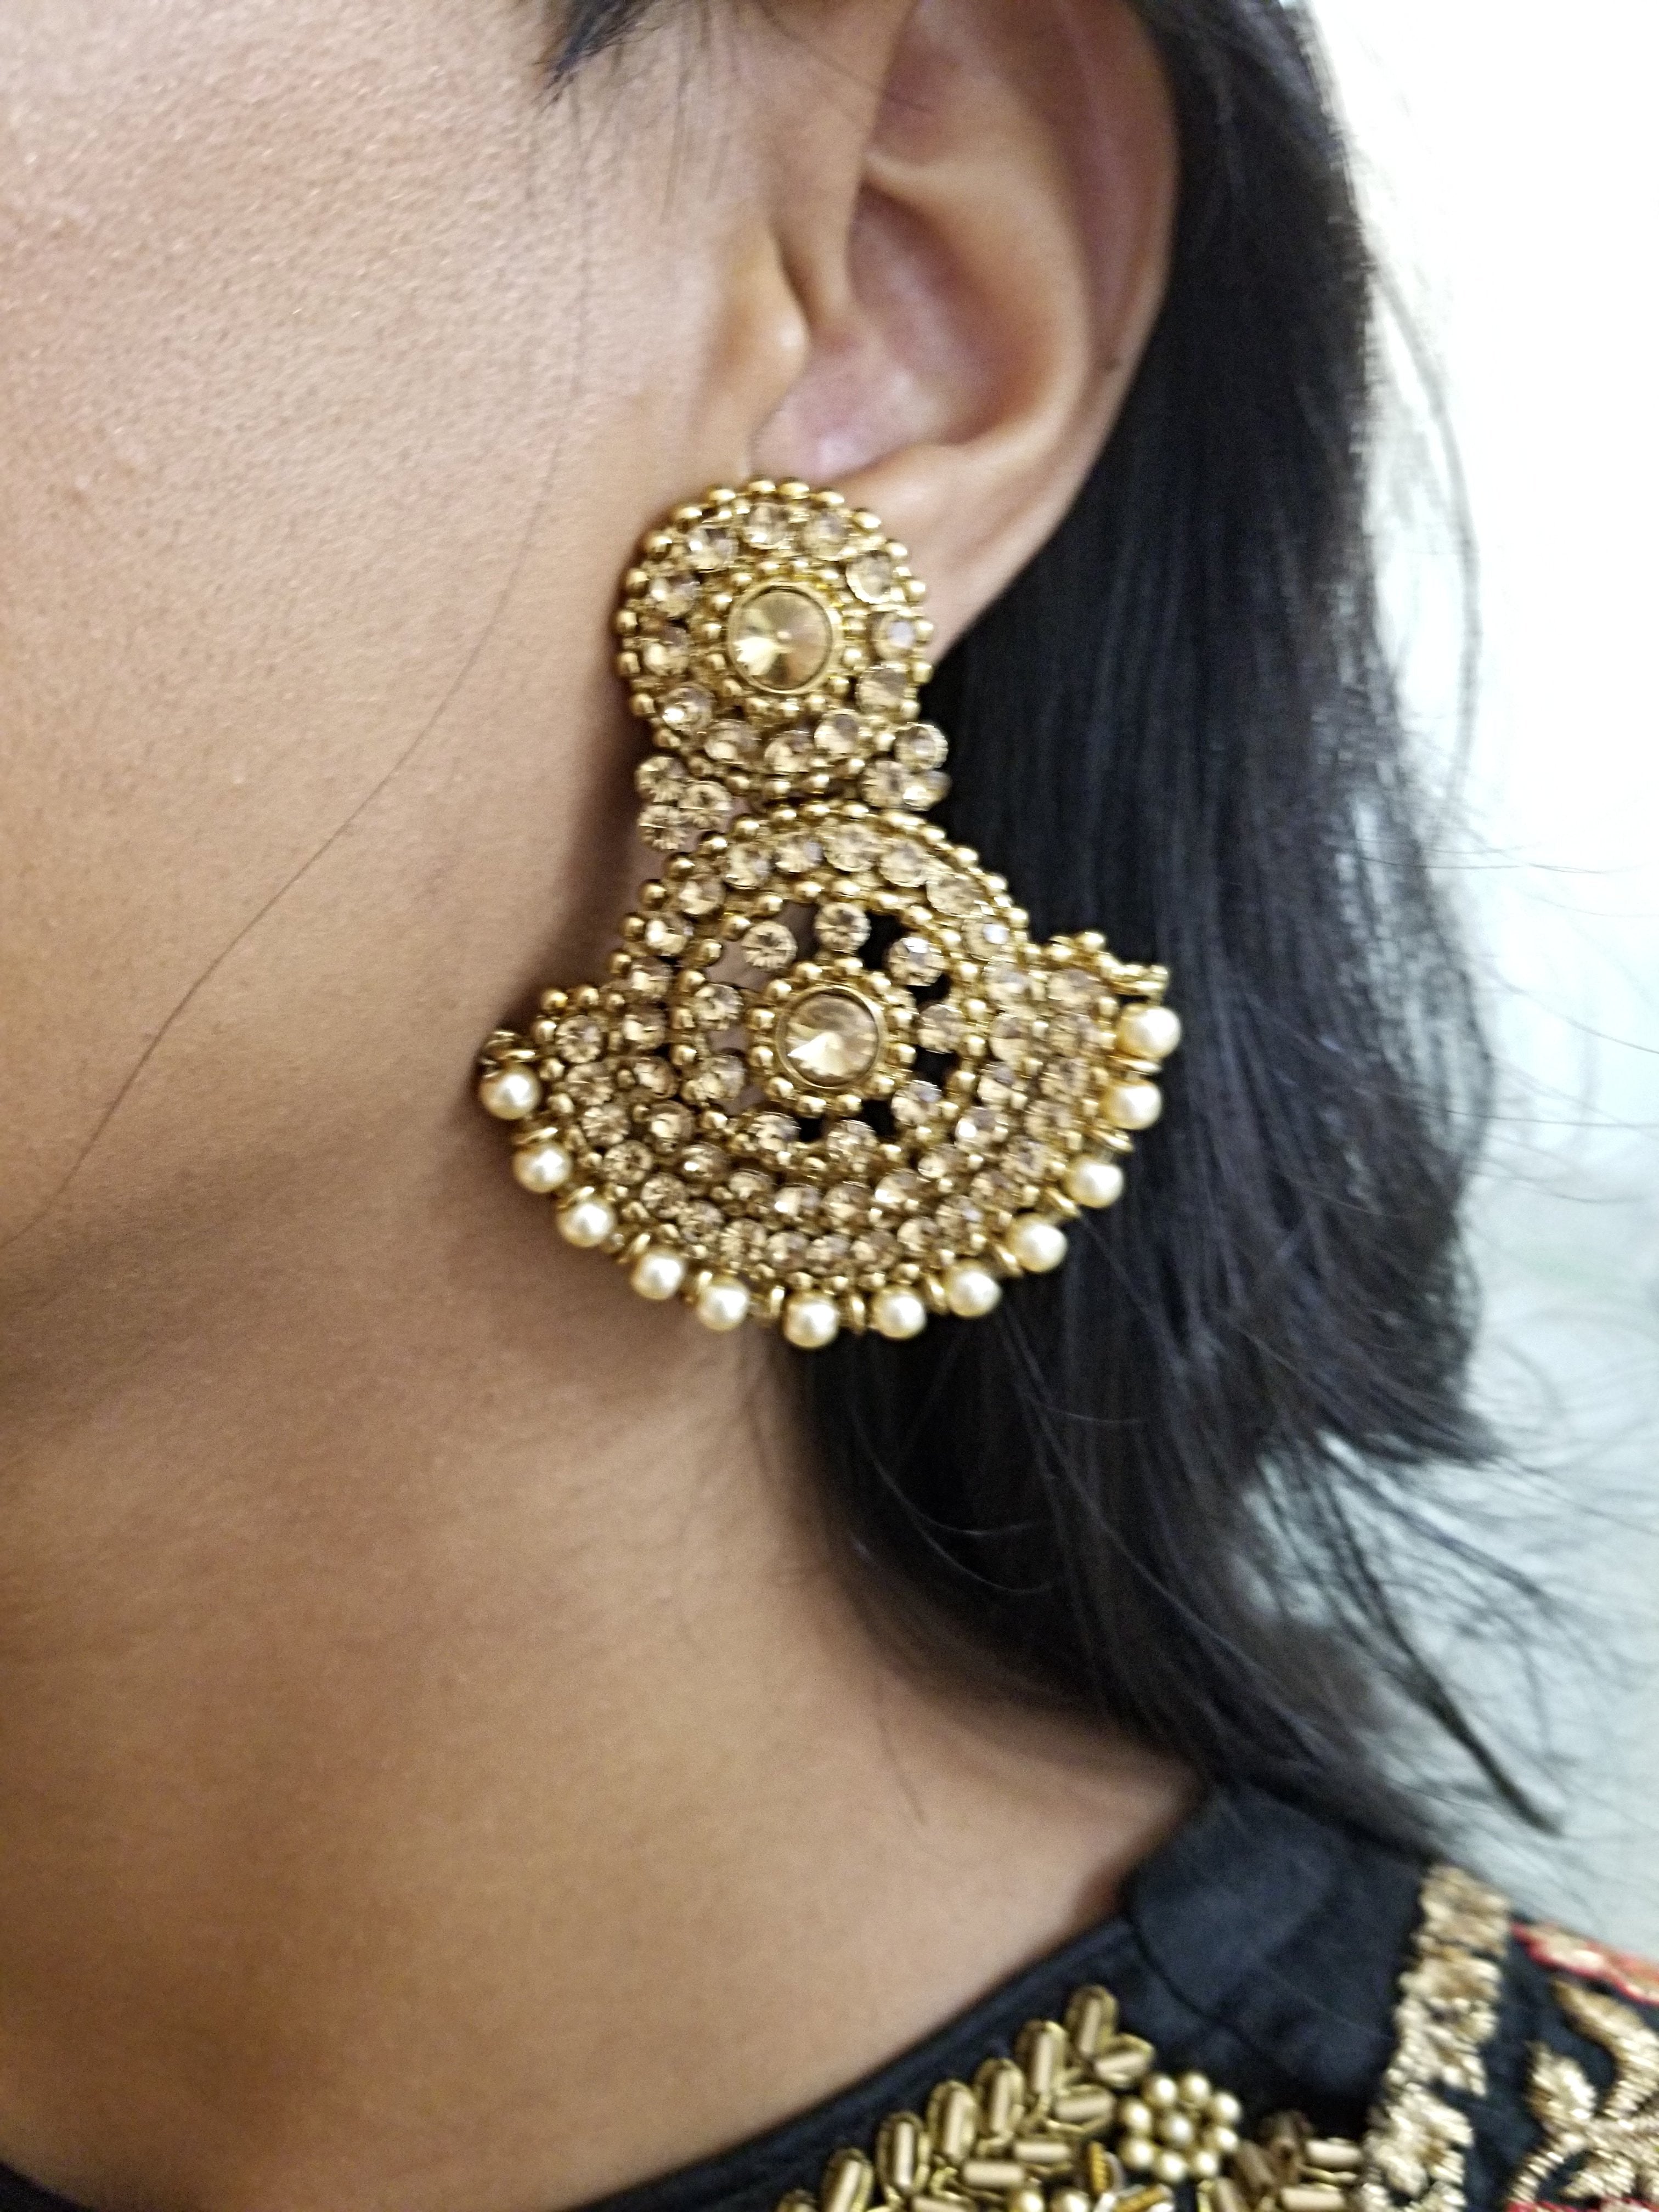 Exquisite Earrings and Tikka Set Adorned With Champagne Pearls